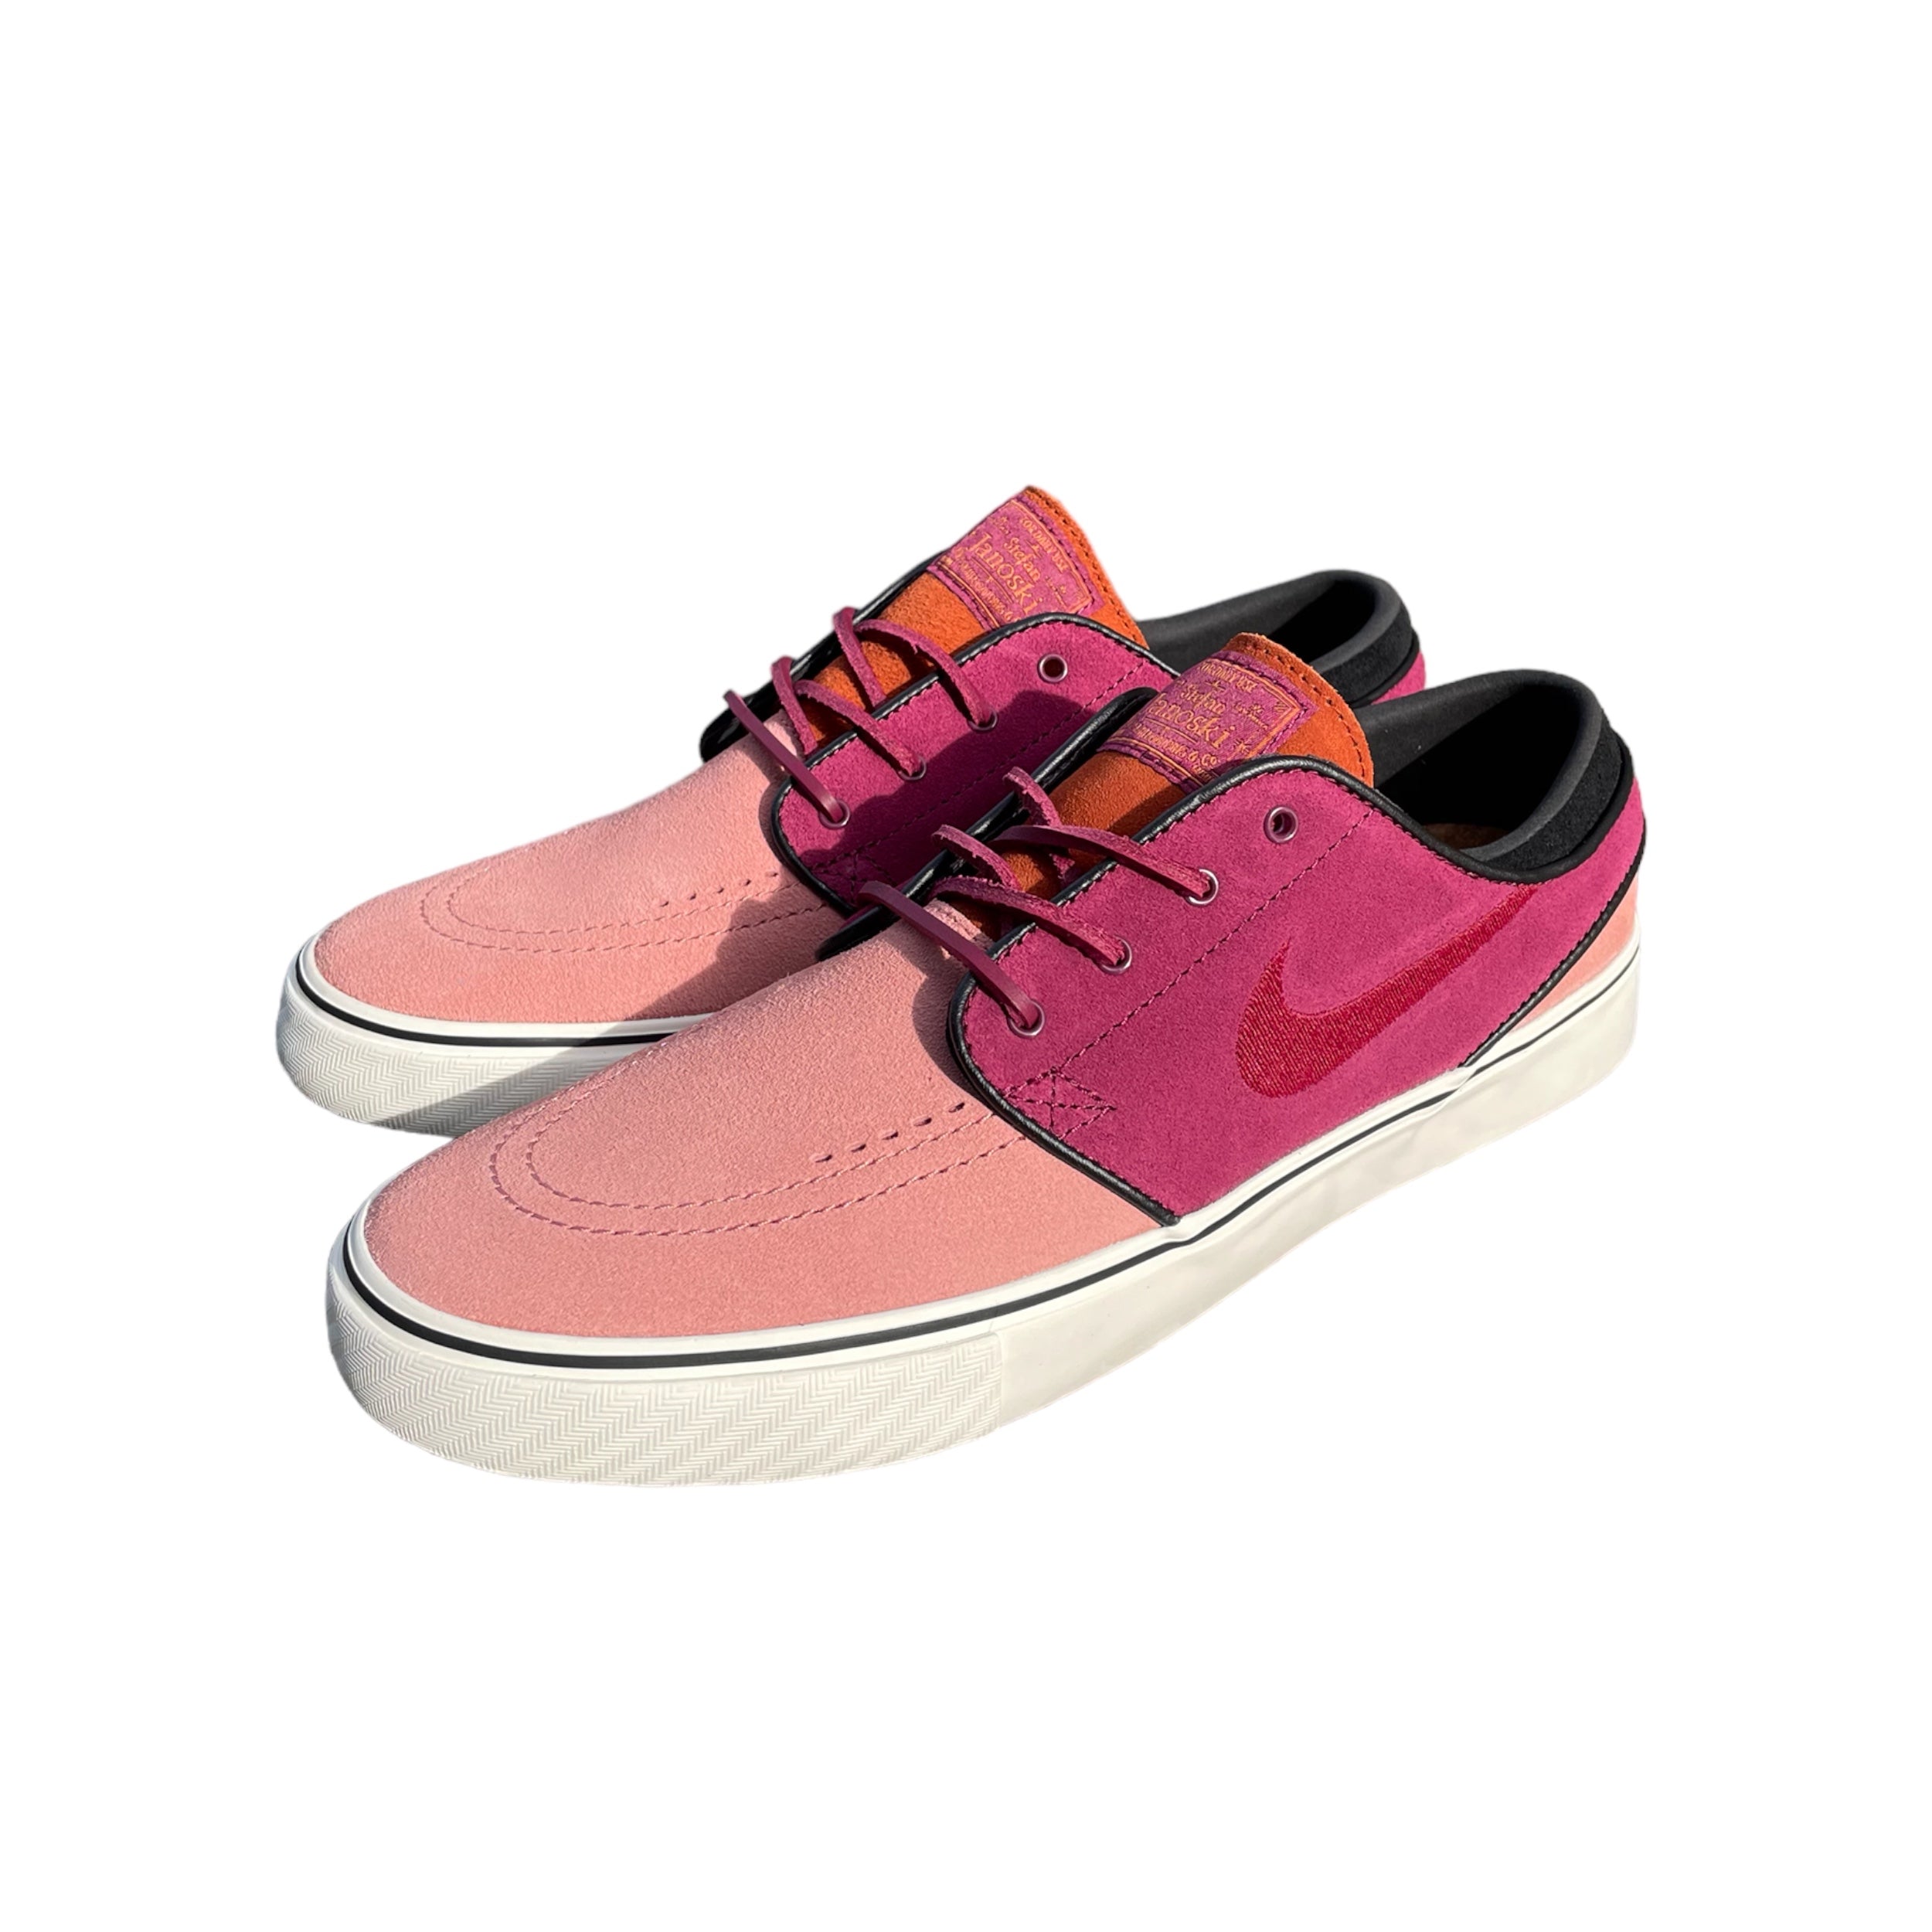 Nike SB Janoski OG+ Low Shoes - Red Stardust/Team Red-Rosewood